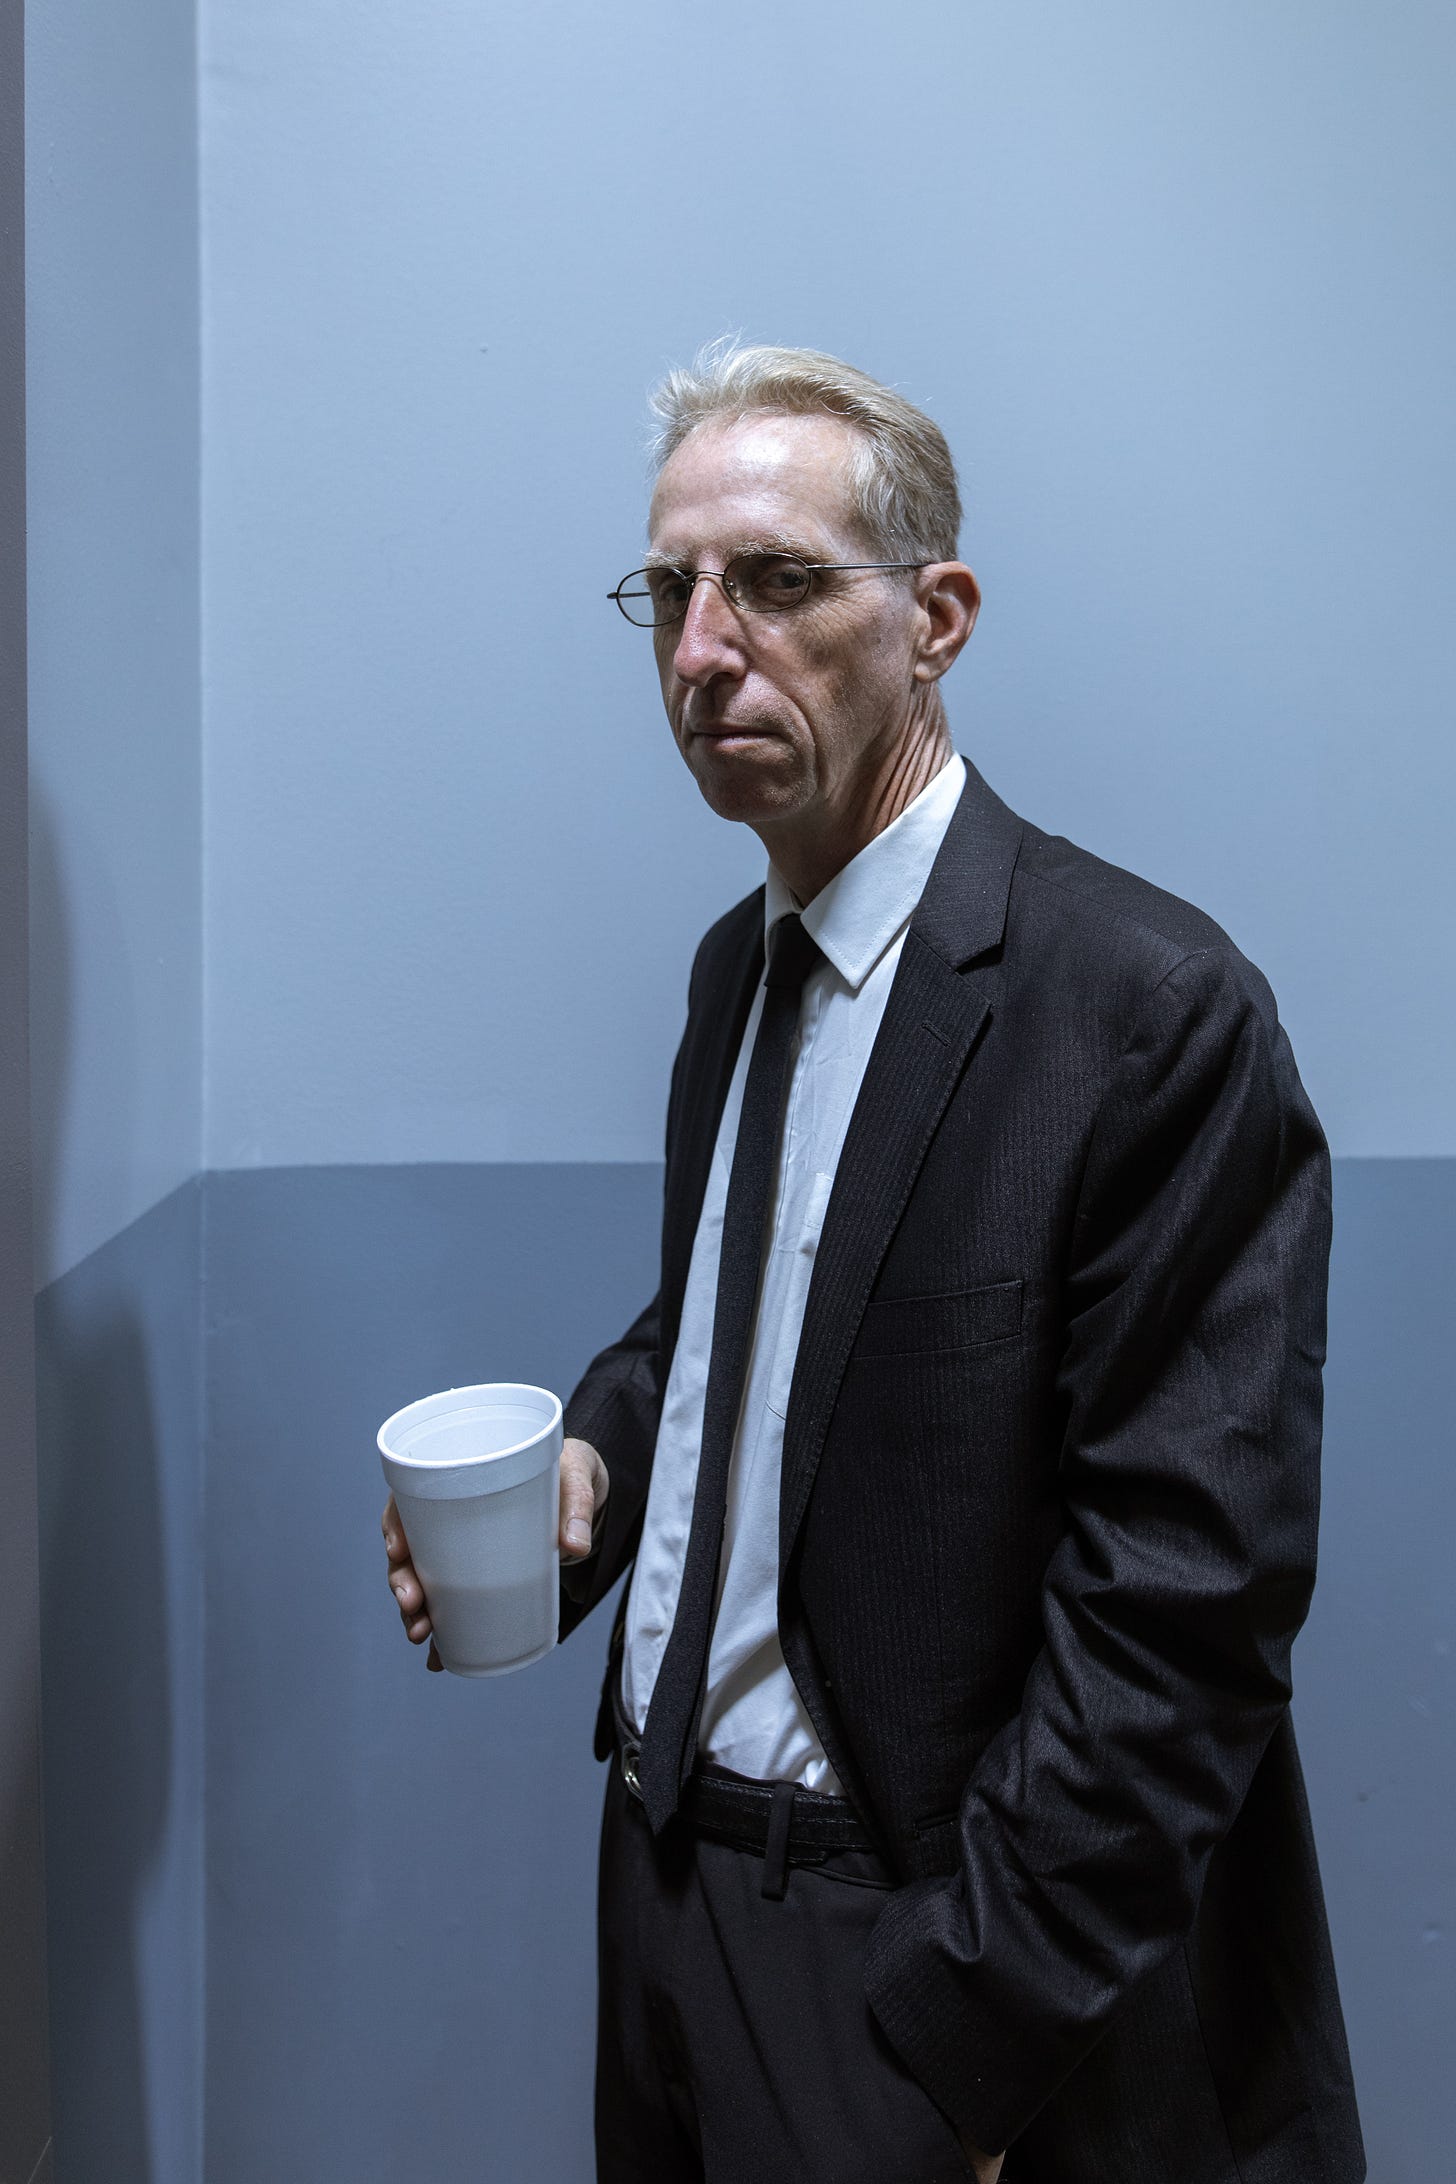 A middle aged man in a suit with a styrofoam cup of coffee. He looks like a cop.